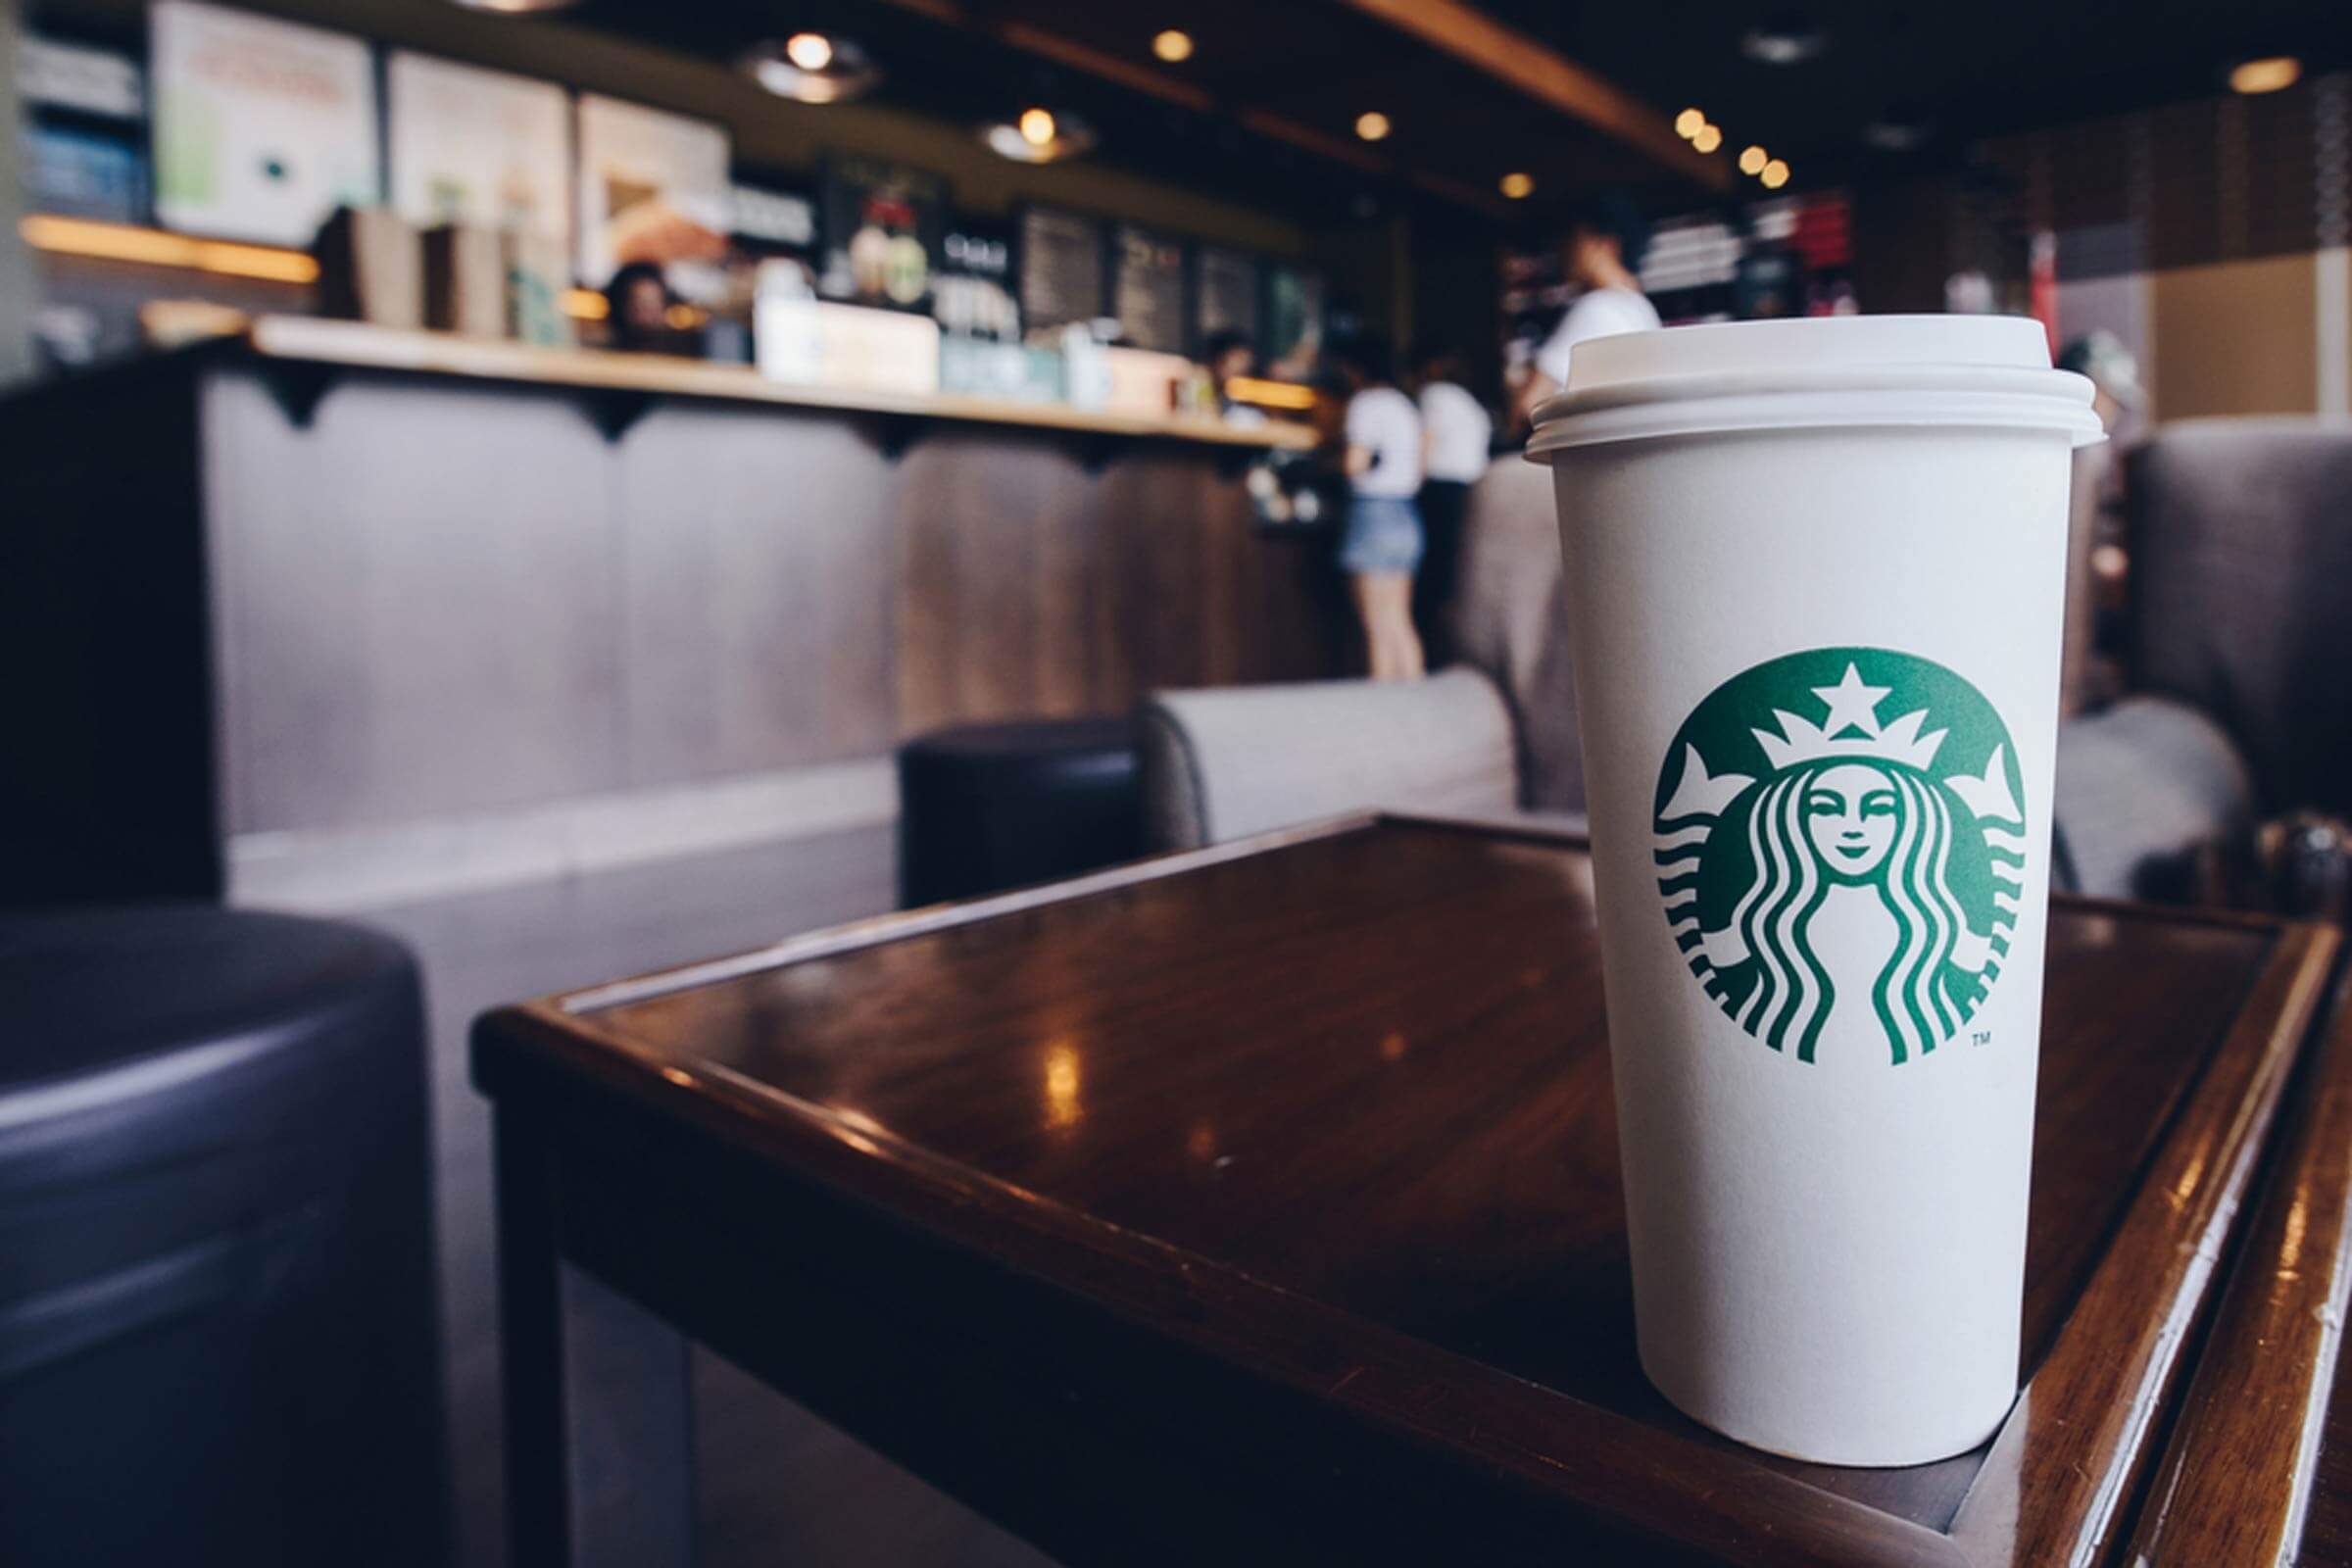 https://www.tasteofhome.com/wp-content/uploads/2020/08/this-is-the-healthiest-drink-at-starbucks-hint-its-not-black-coffee-or-tea_665361031_editorial_boyloso.jpg